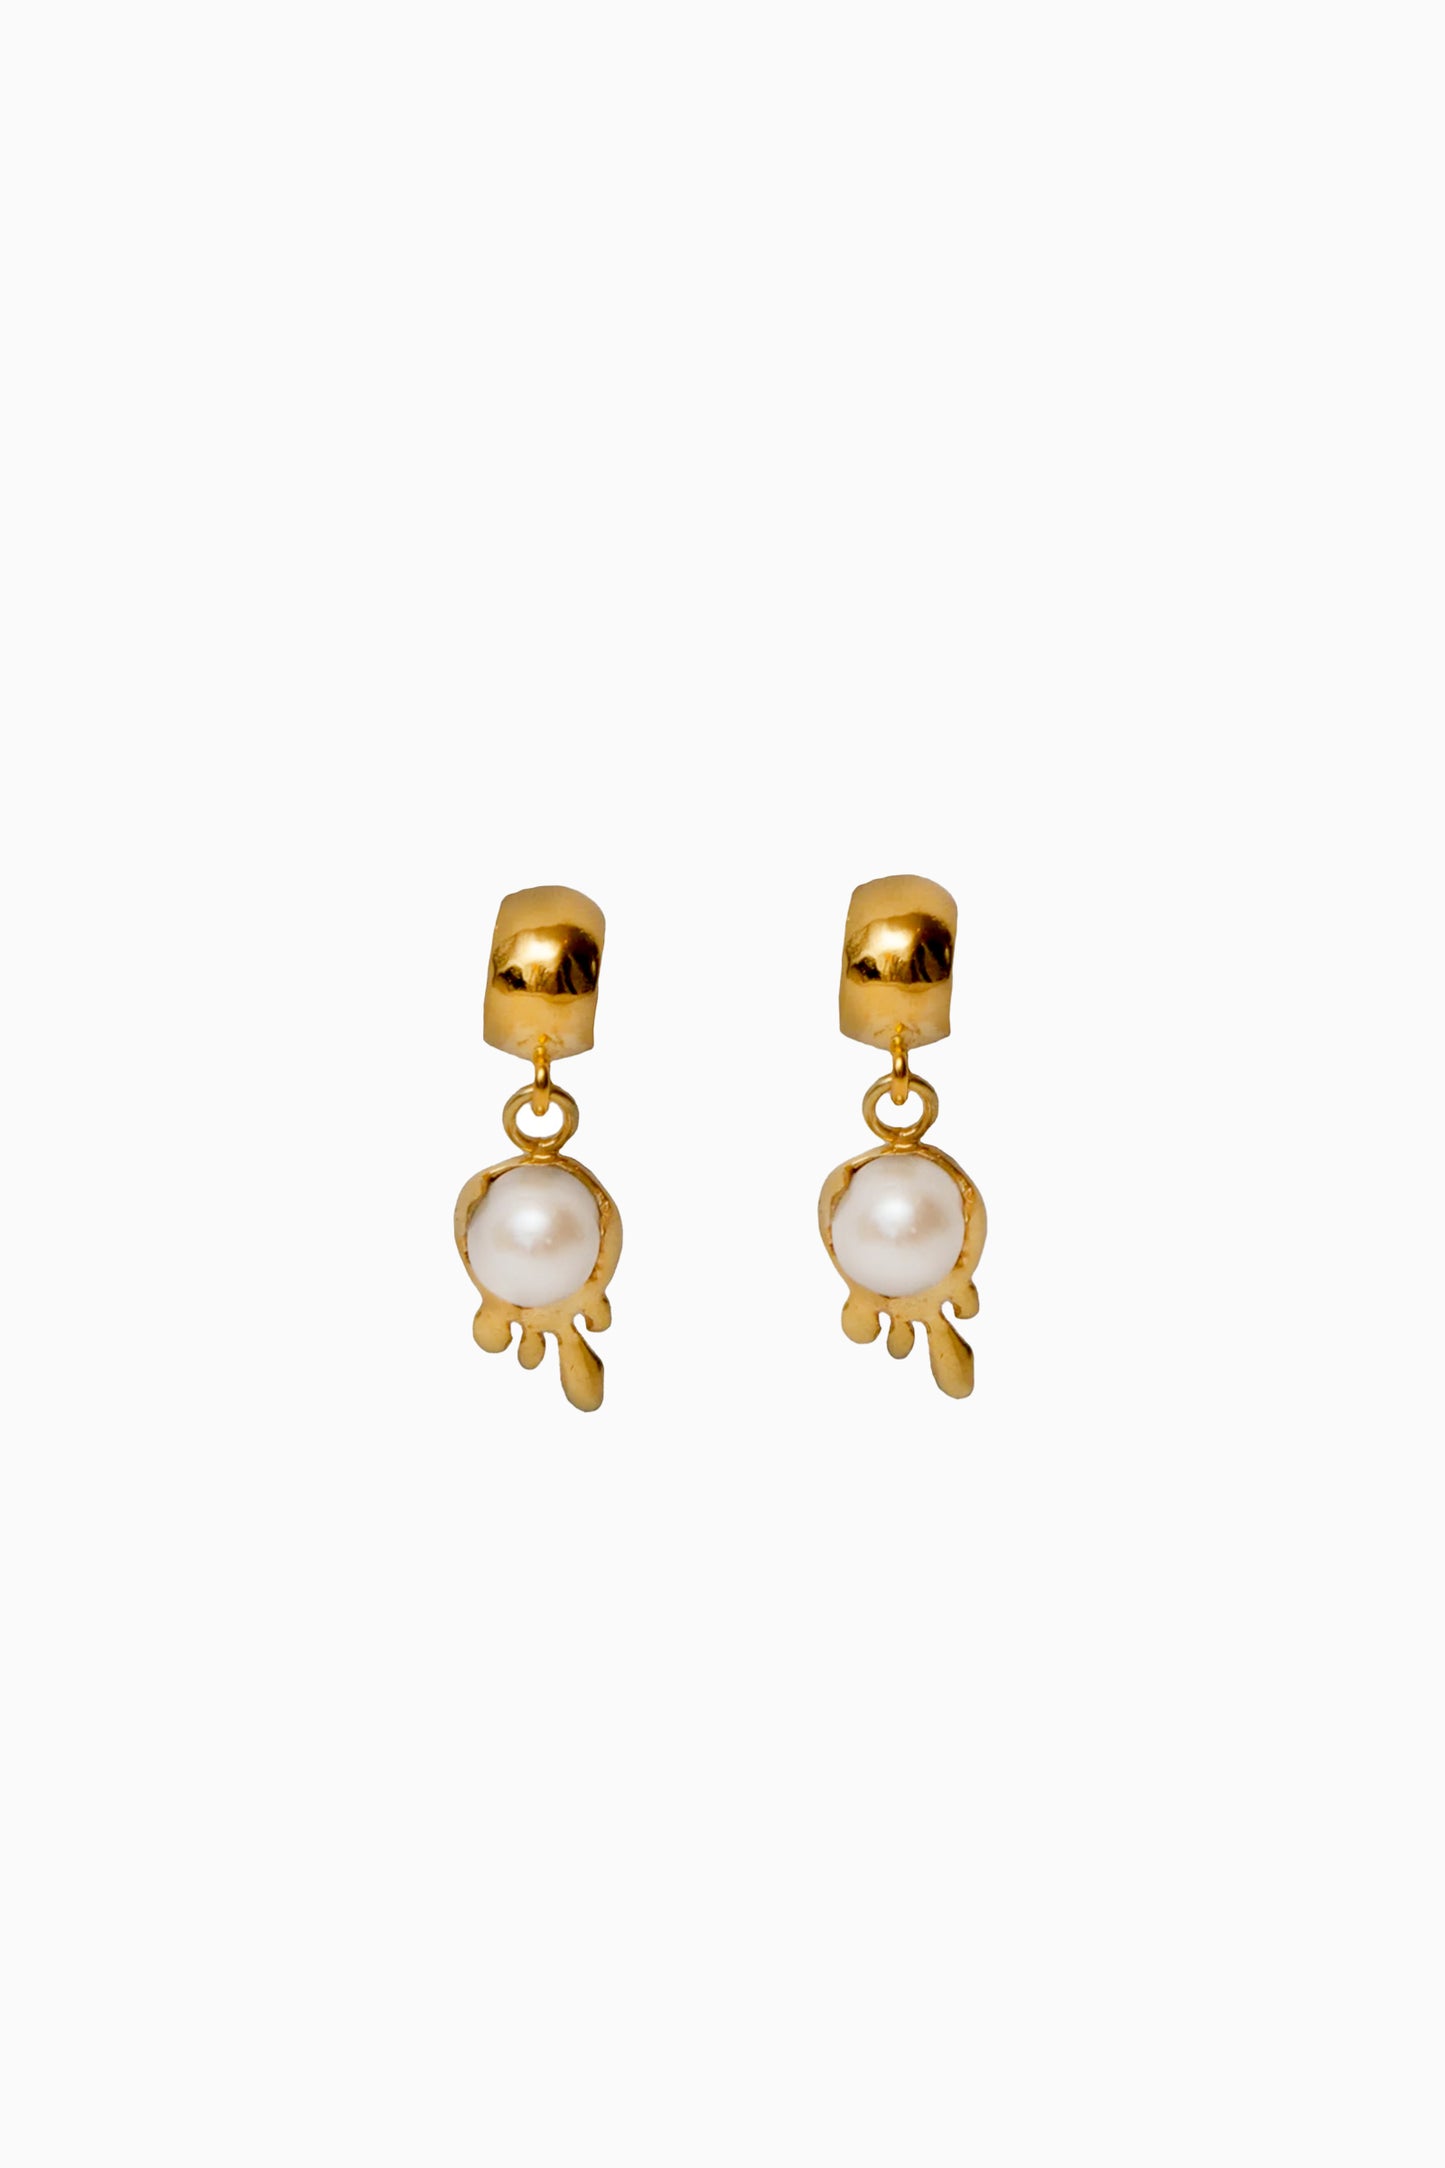 Drippy Earrings Large (Pair) - Gold